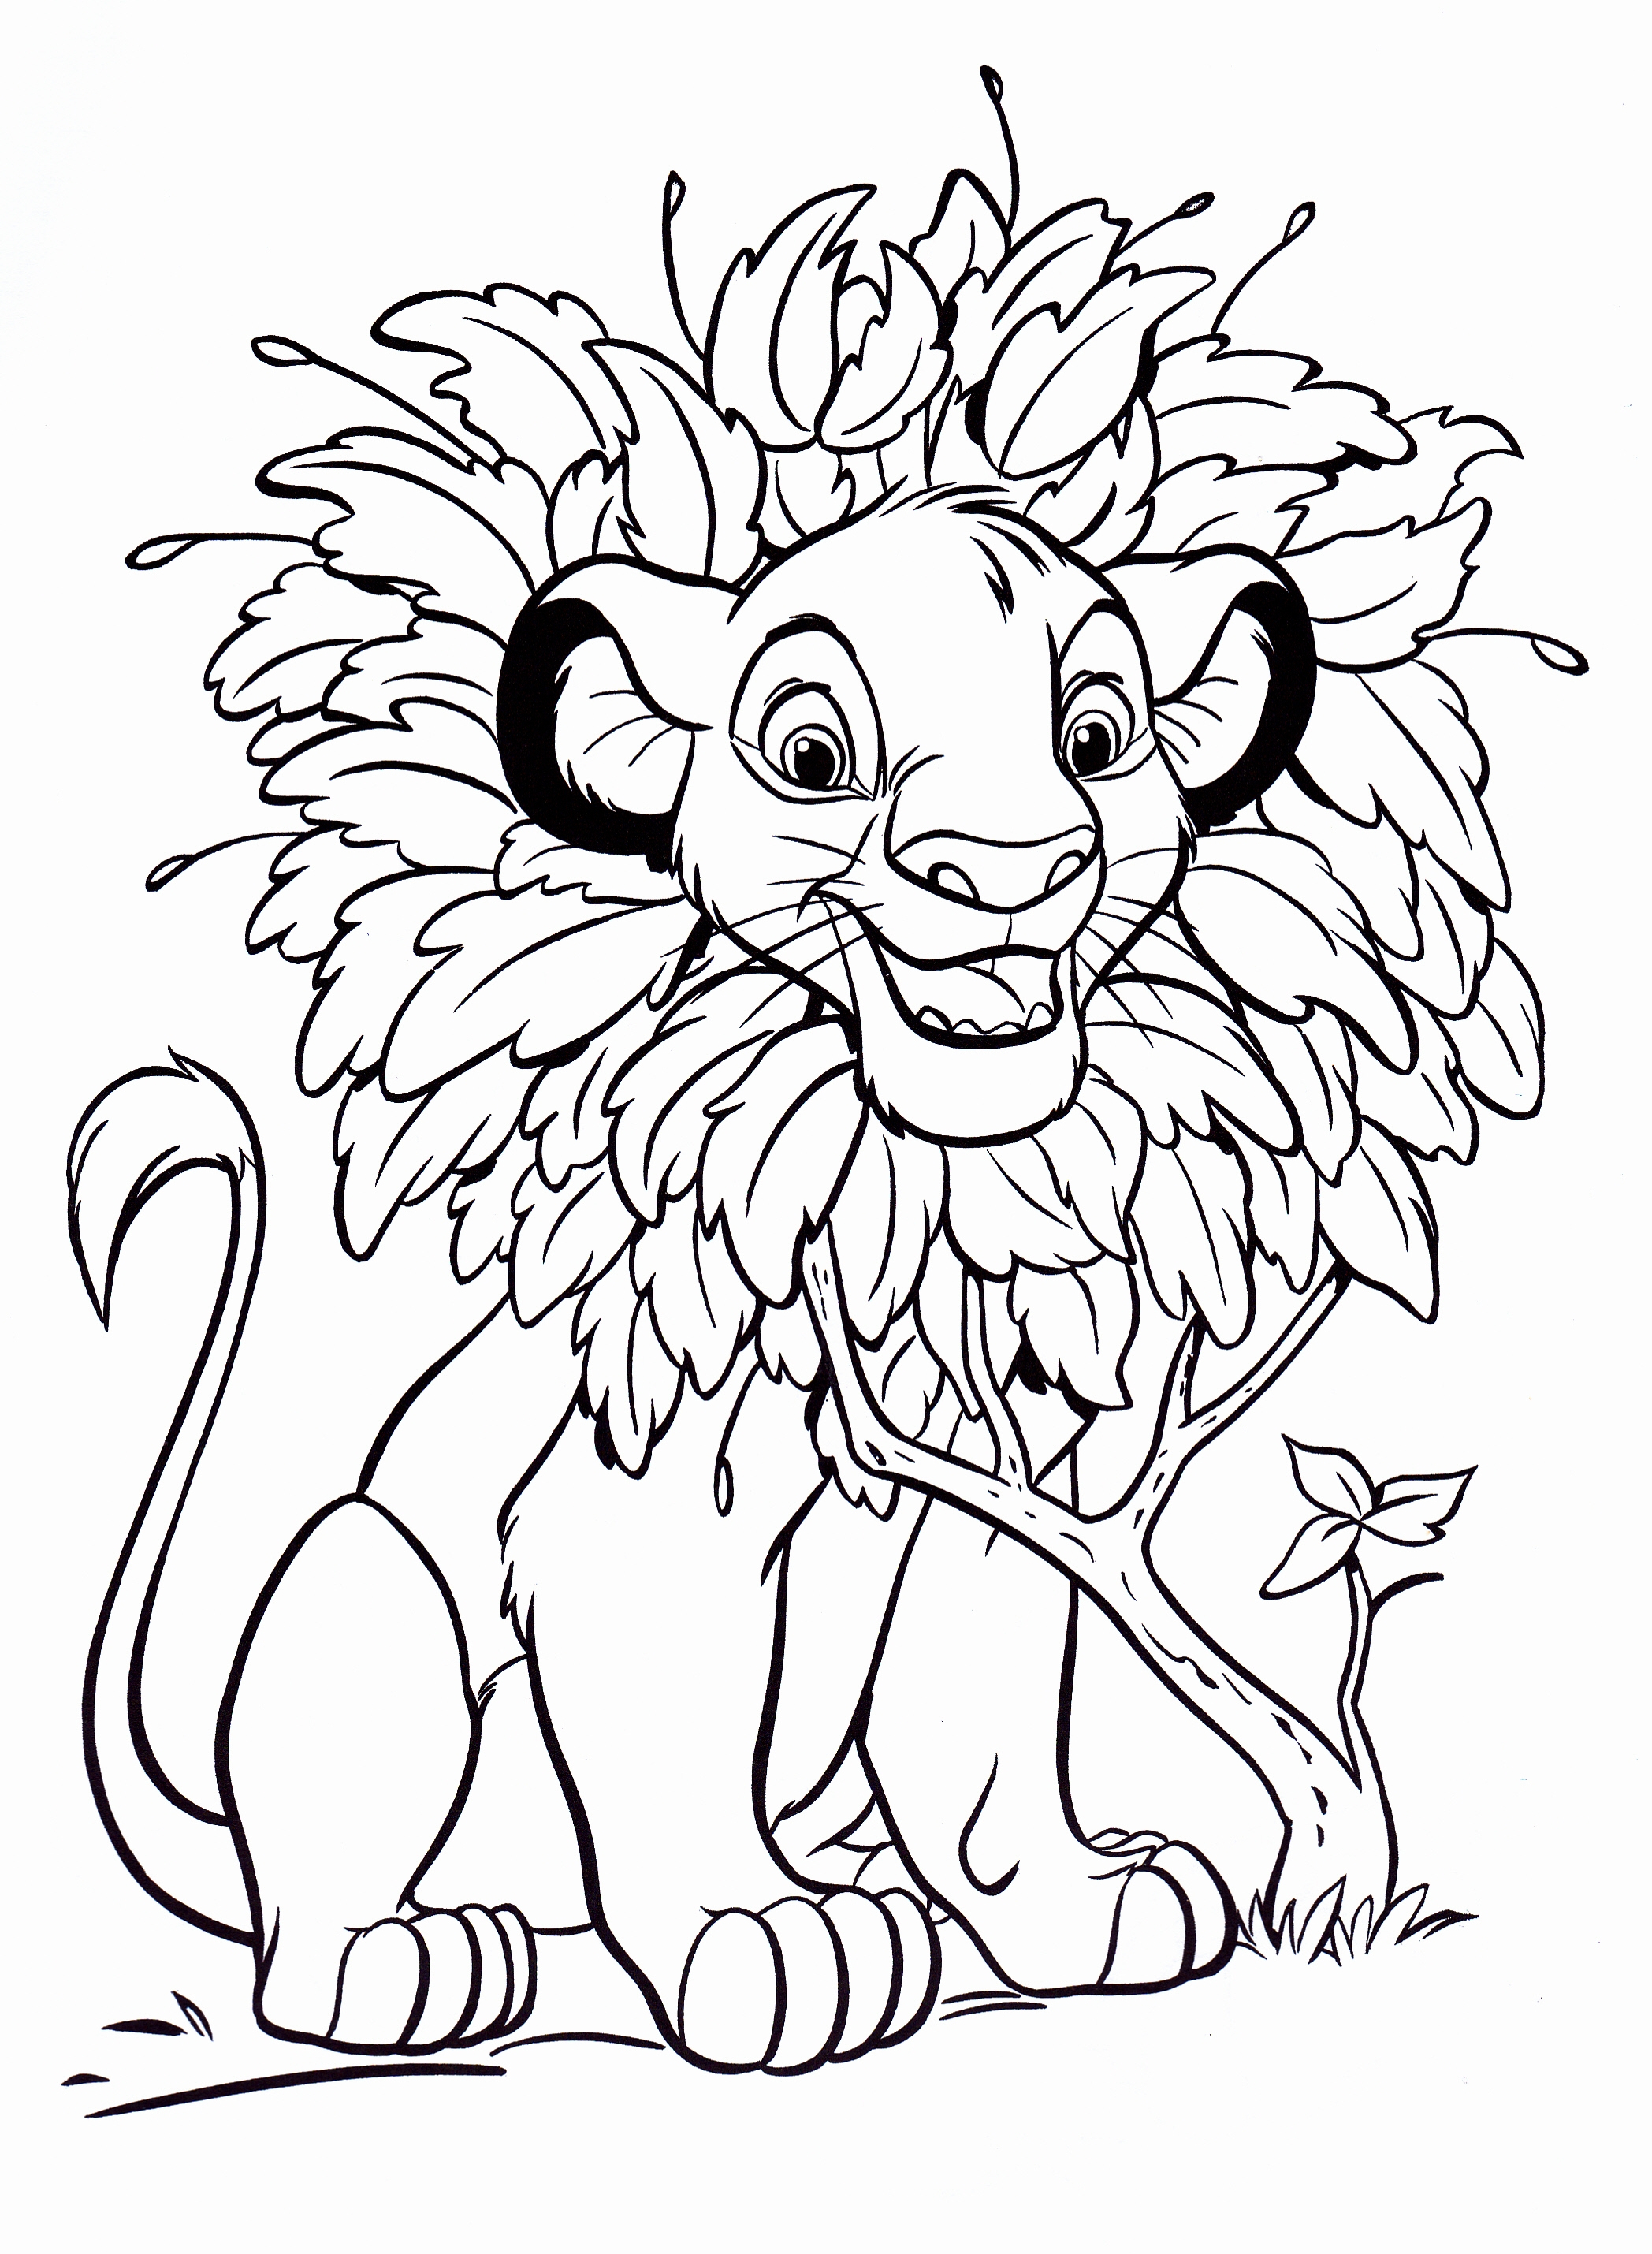 Coloring Pages Disney - Saglik - Free Printable Coloring Pages Of Disney Characters